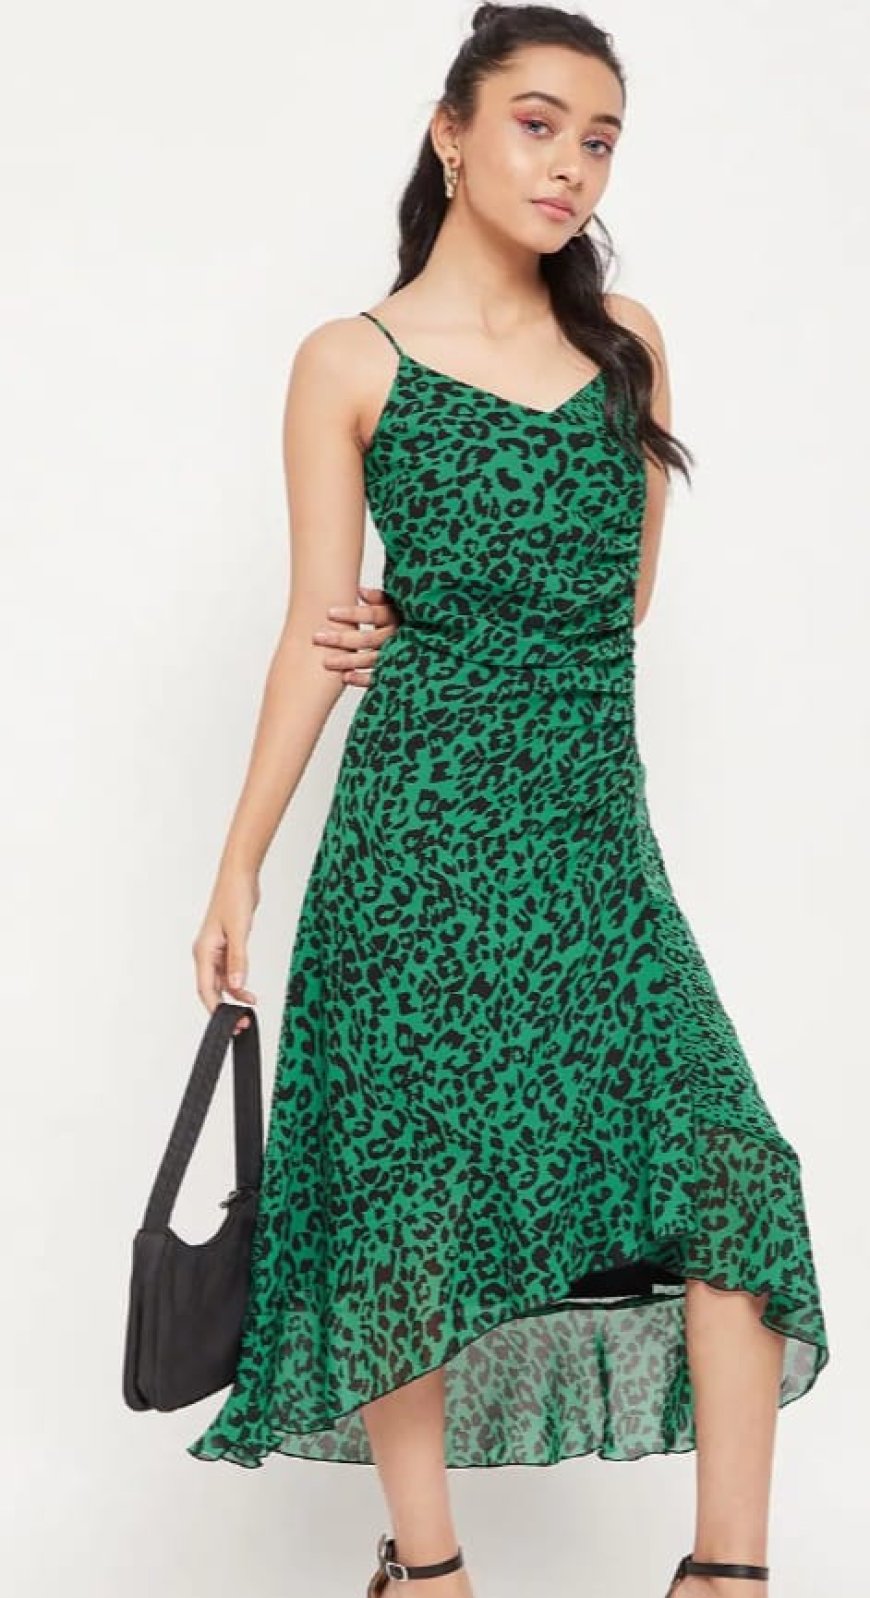 Boom! dresses below 1500- Myntra's hot dresses sales is booming this month.